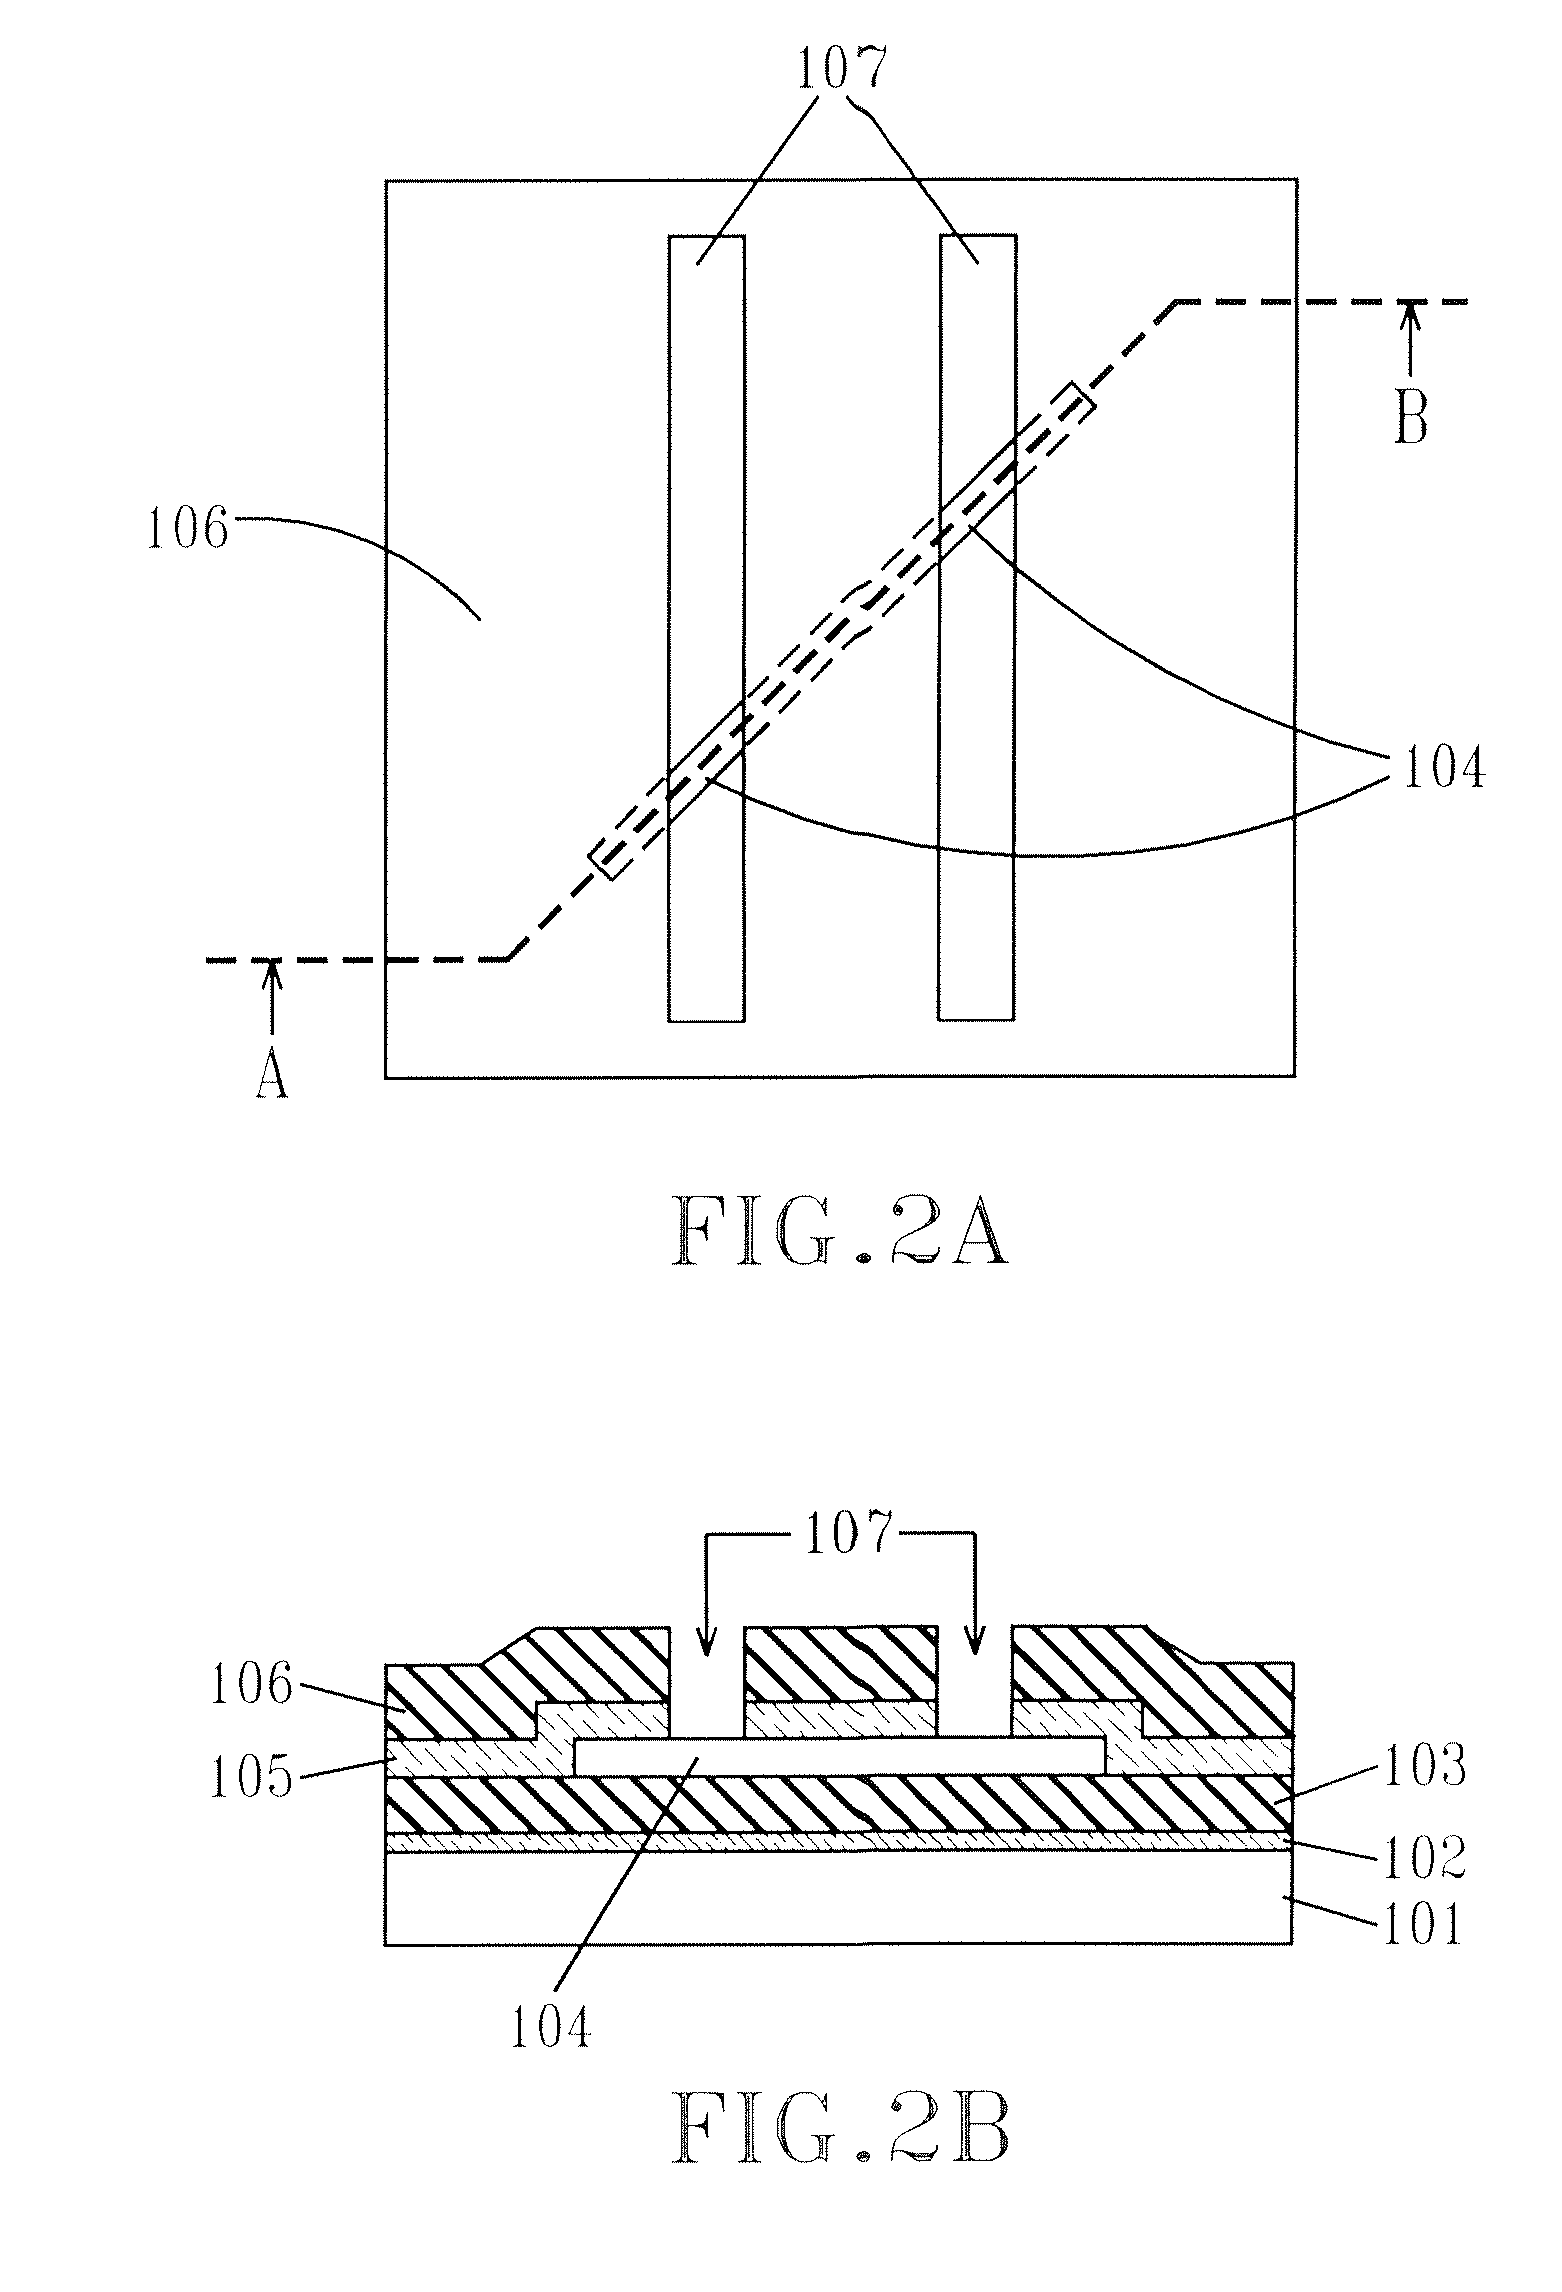 Nanowire MOSFET with doped epitaxial contacts for source and drain